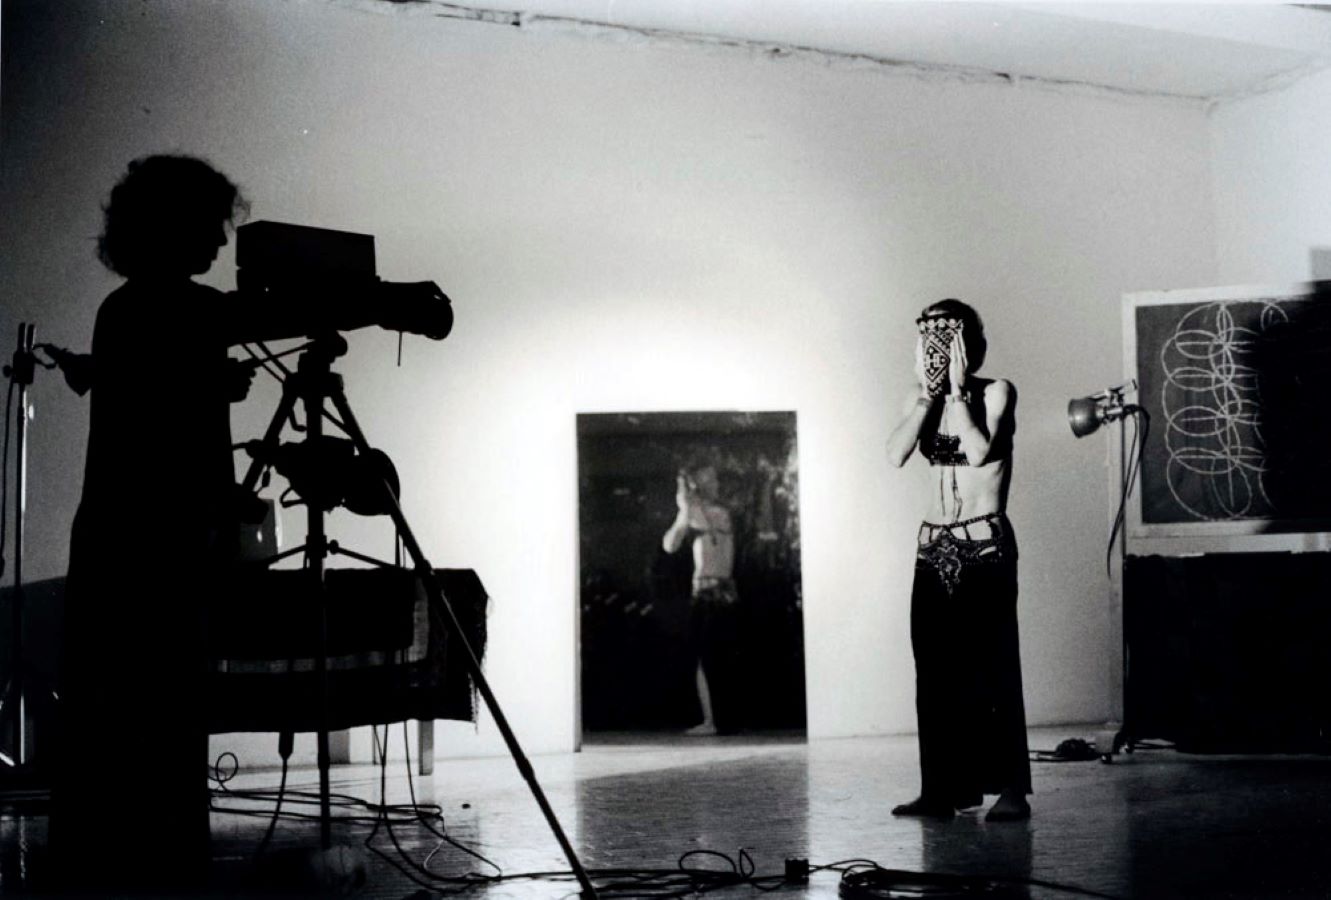 A camerawomen stands behind a tripod while Jonas covers her face. To the left, is a large mirror reflecting Jonas.